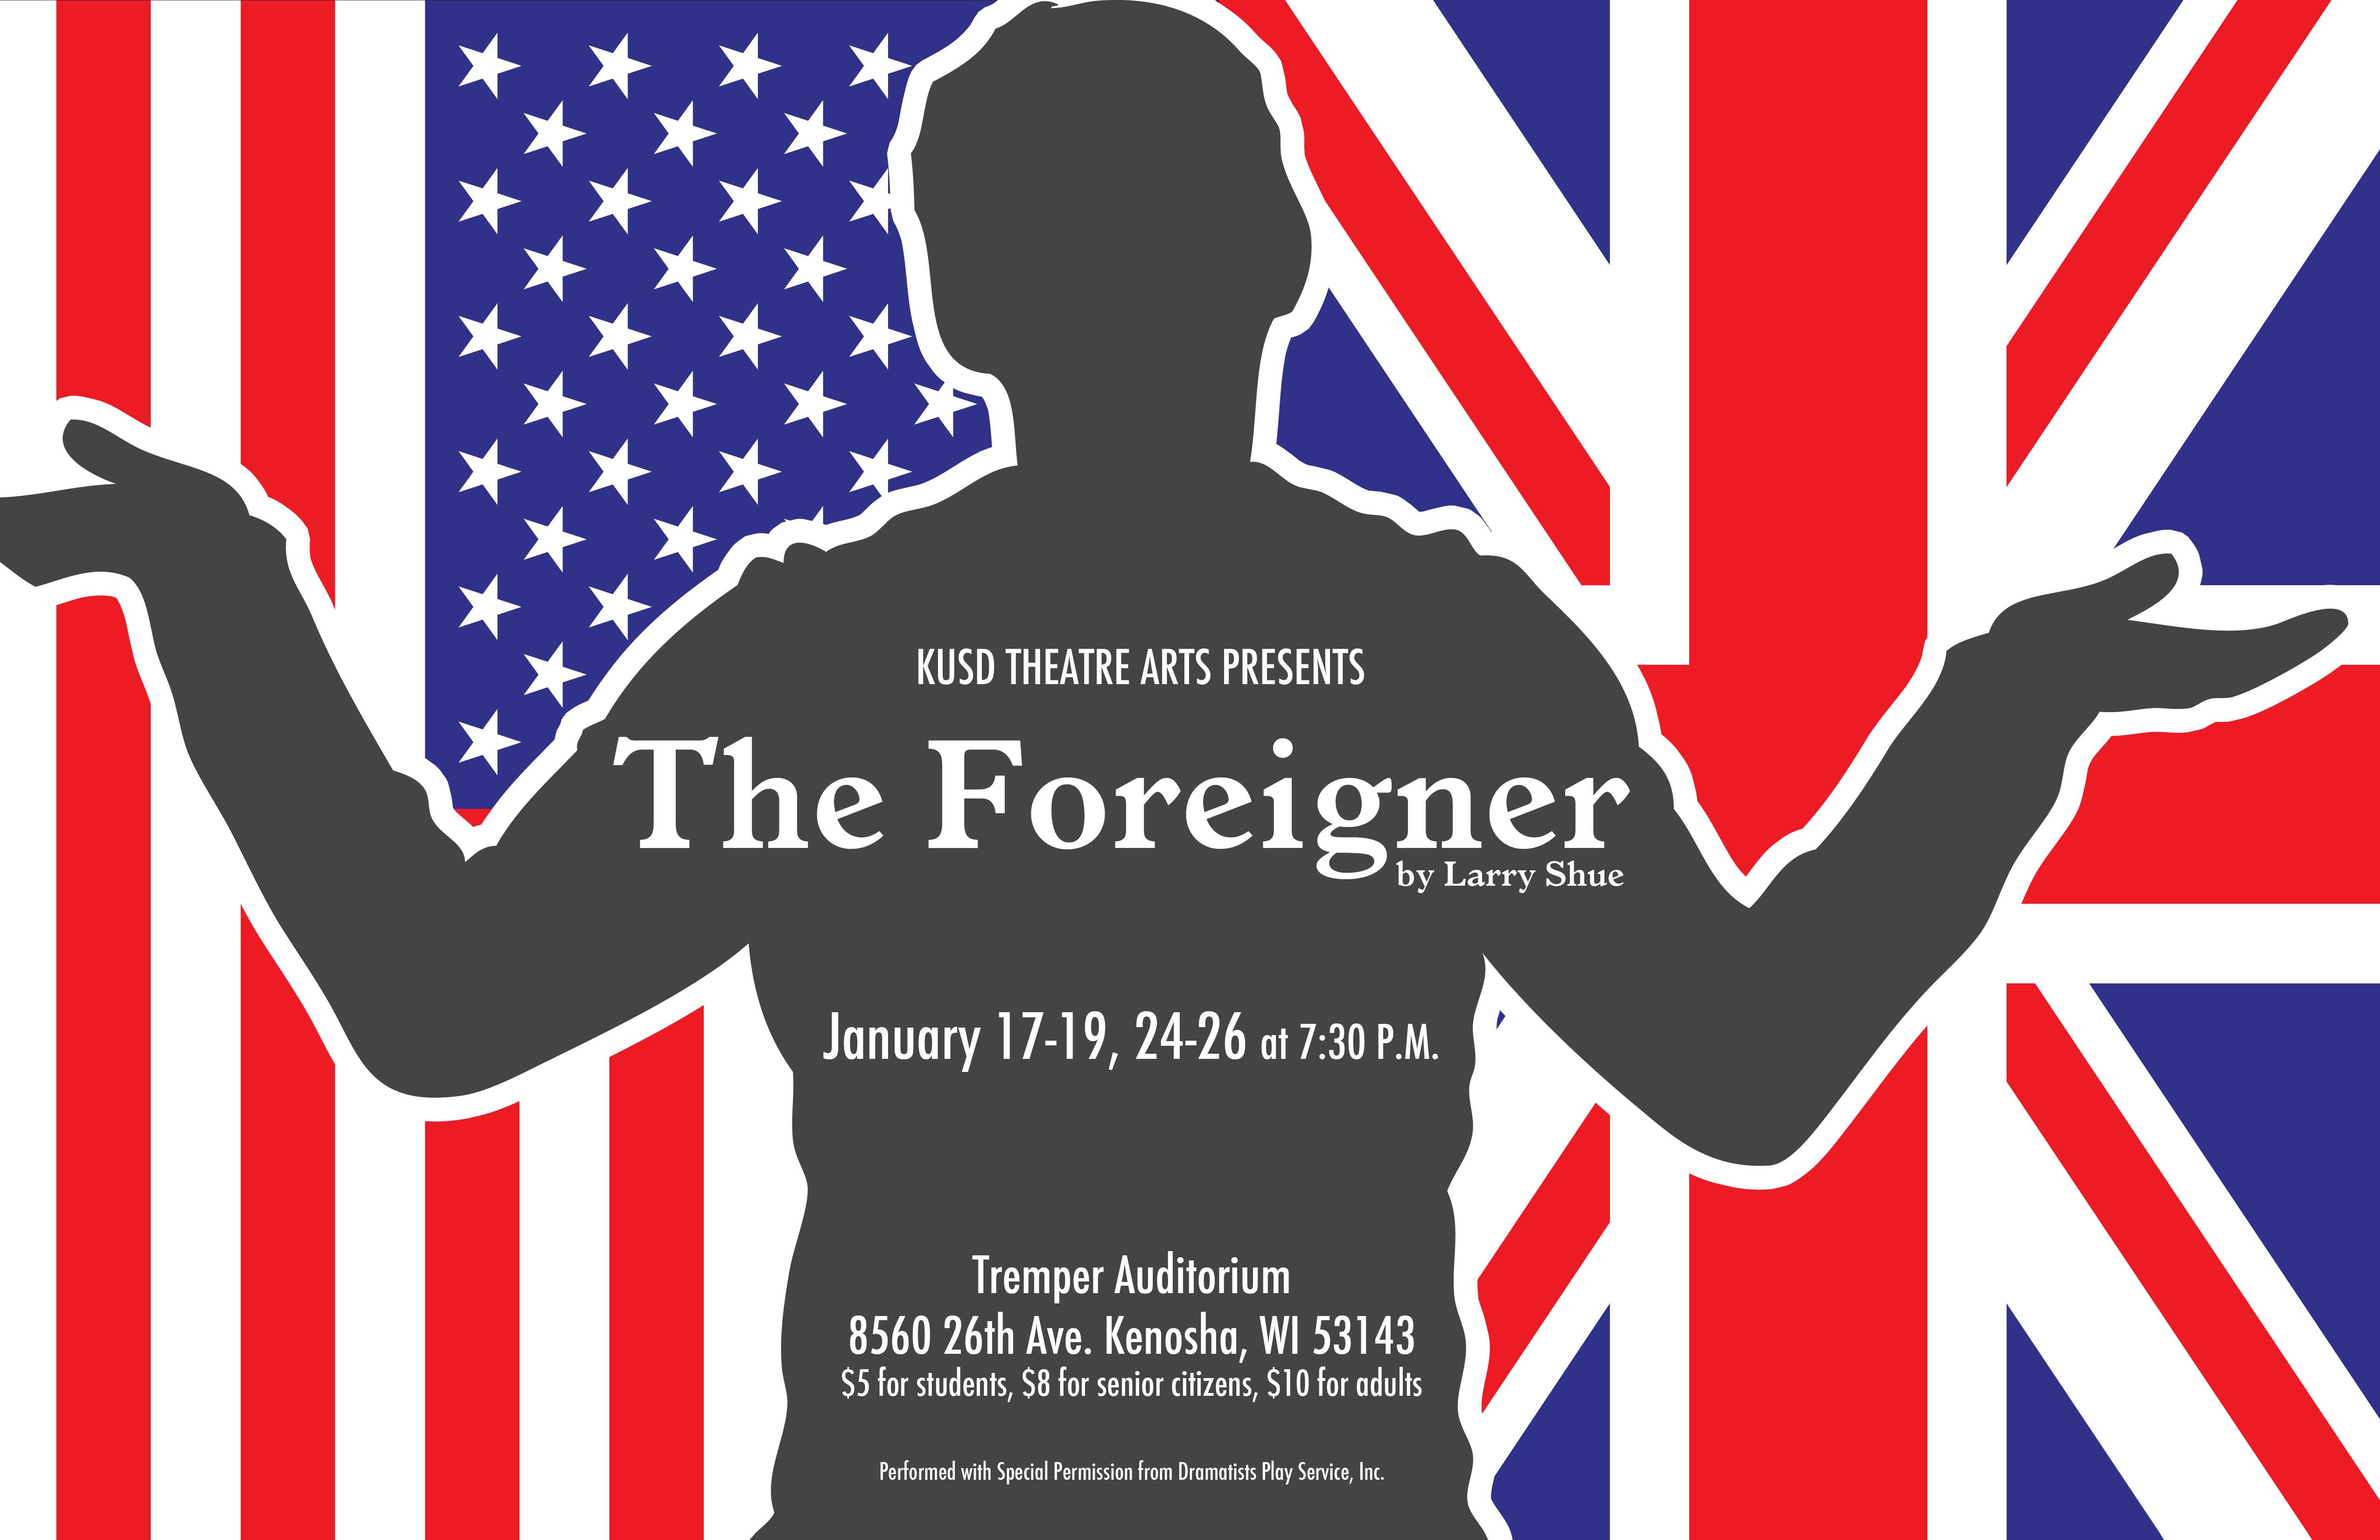 The poster for The Foreigner